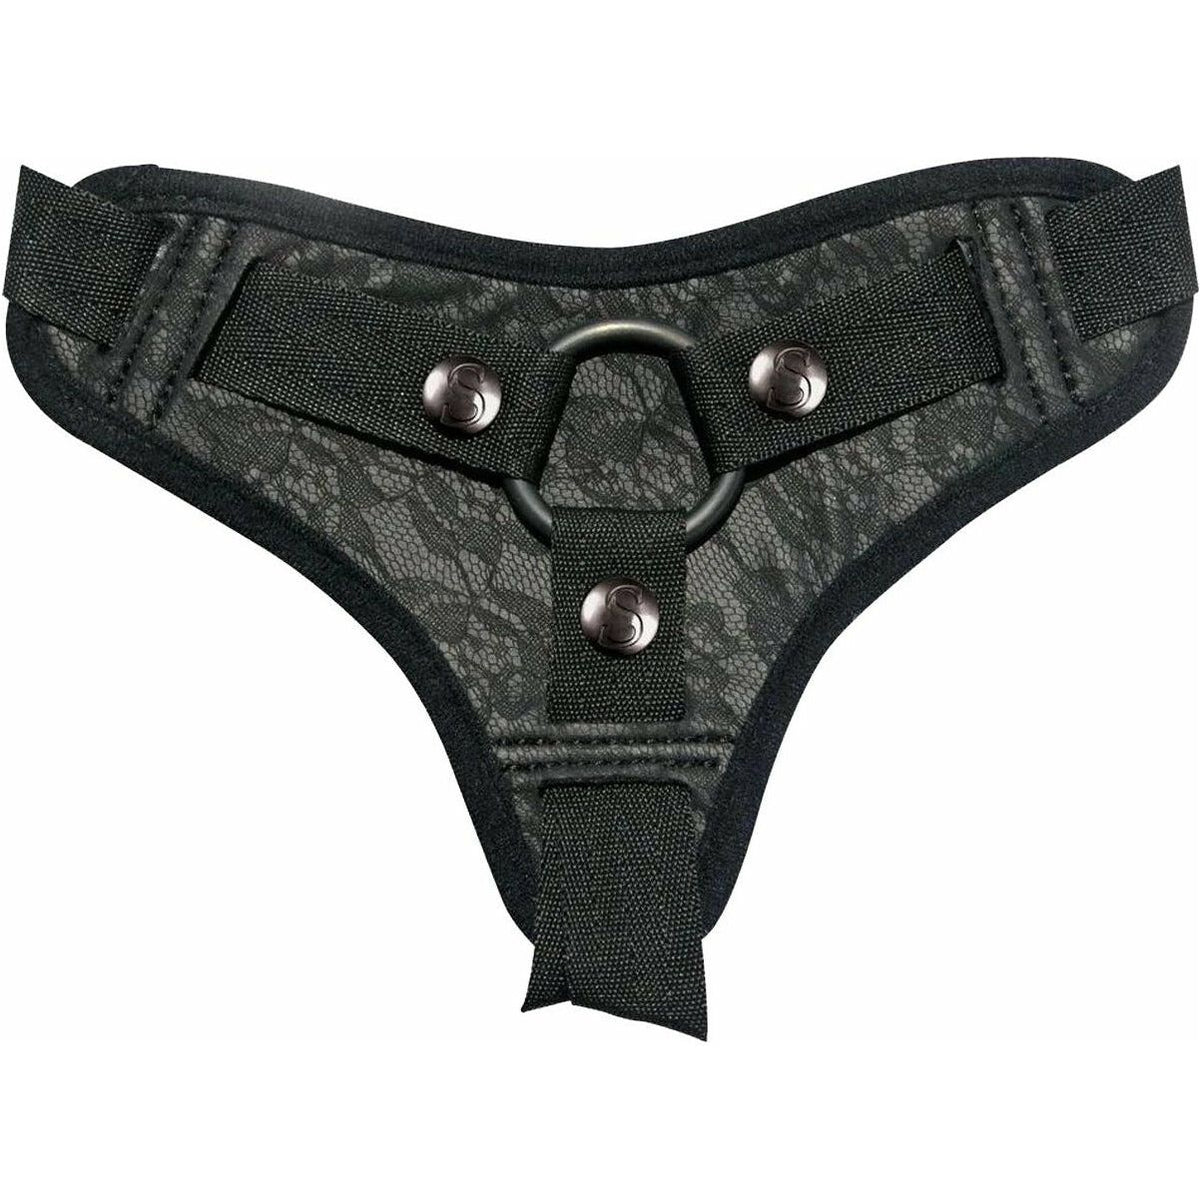 Sportsheets Sincerely - Lace Strap-On - Black